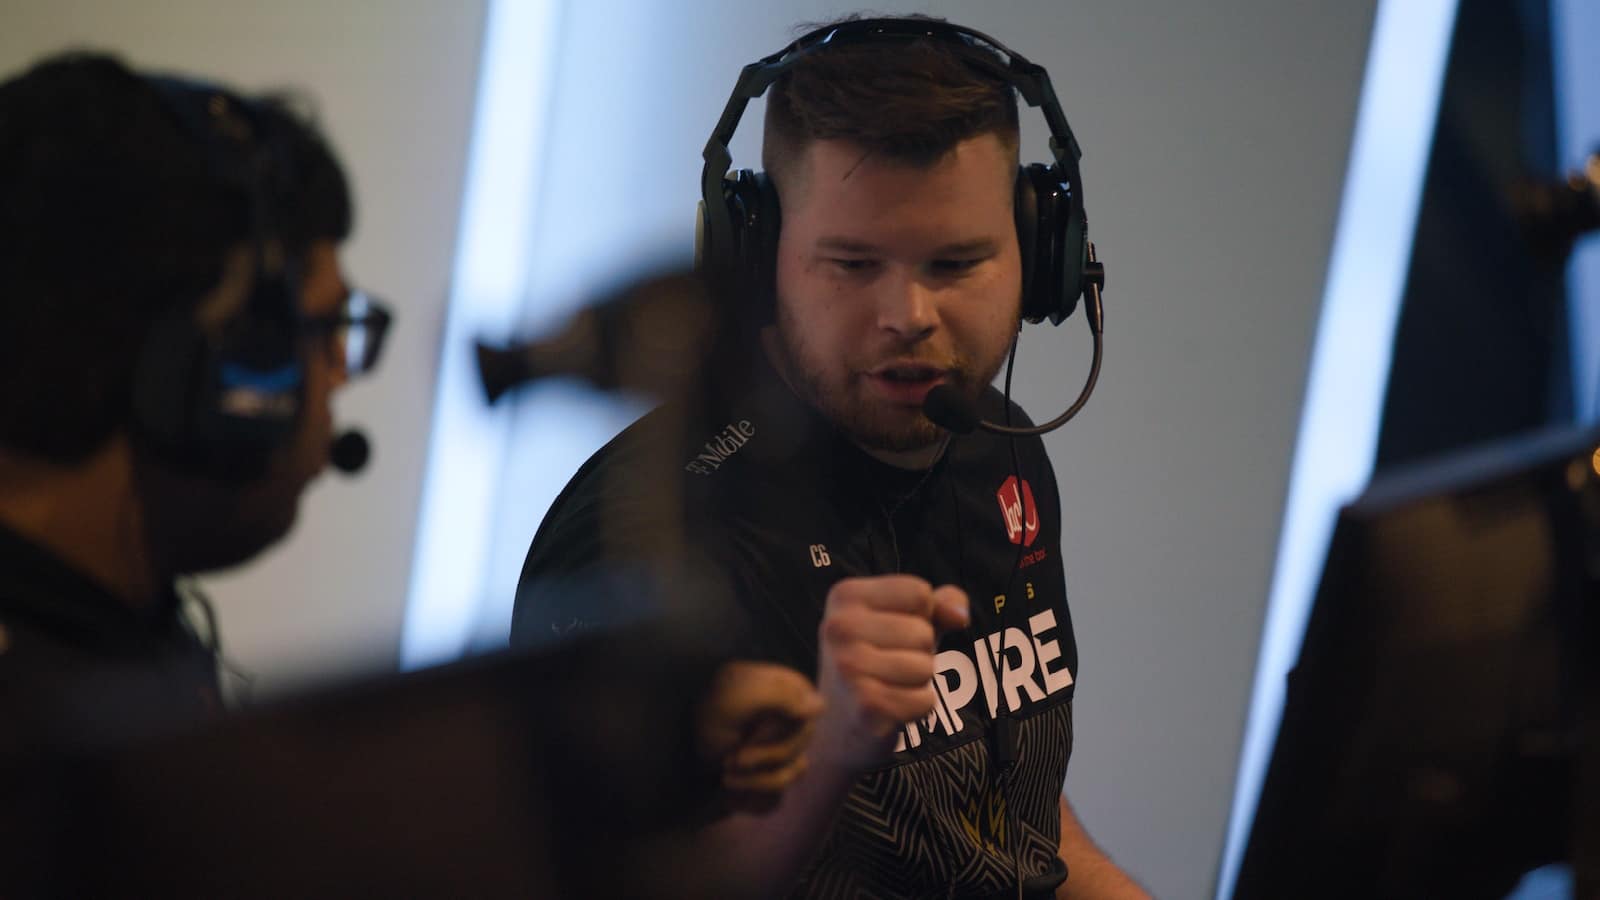 crimsix and illey for dallas empire at cdl stage 4 major